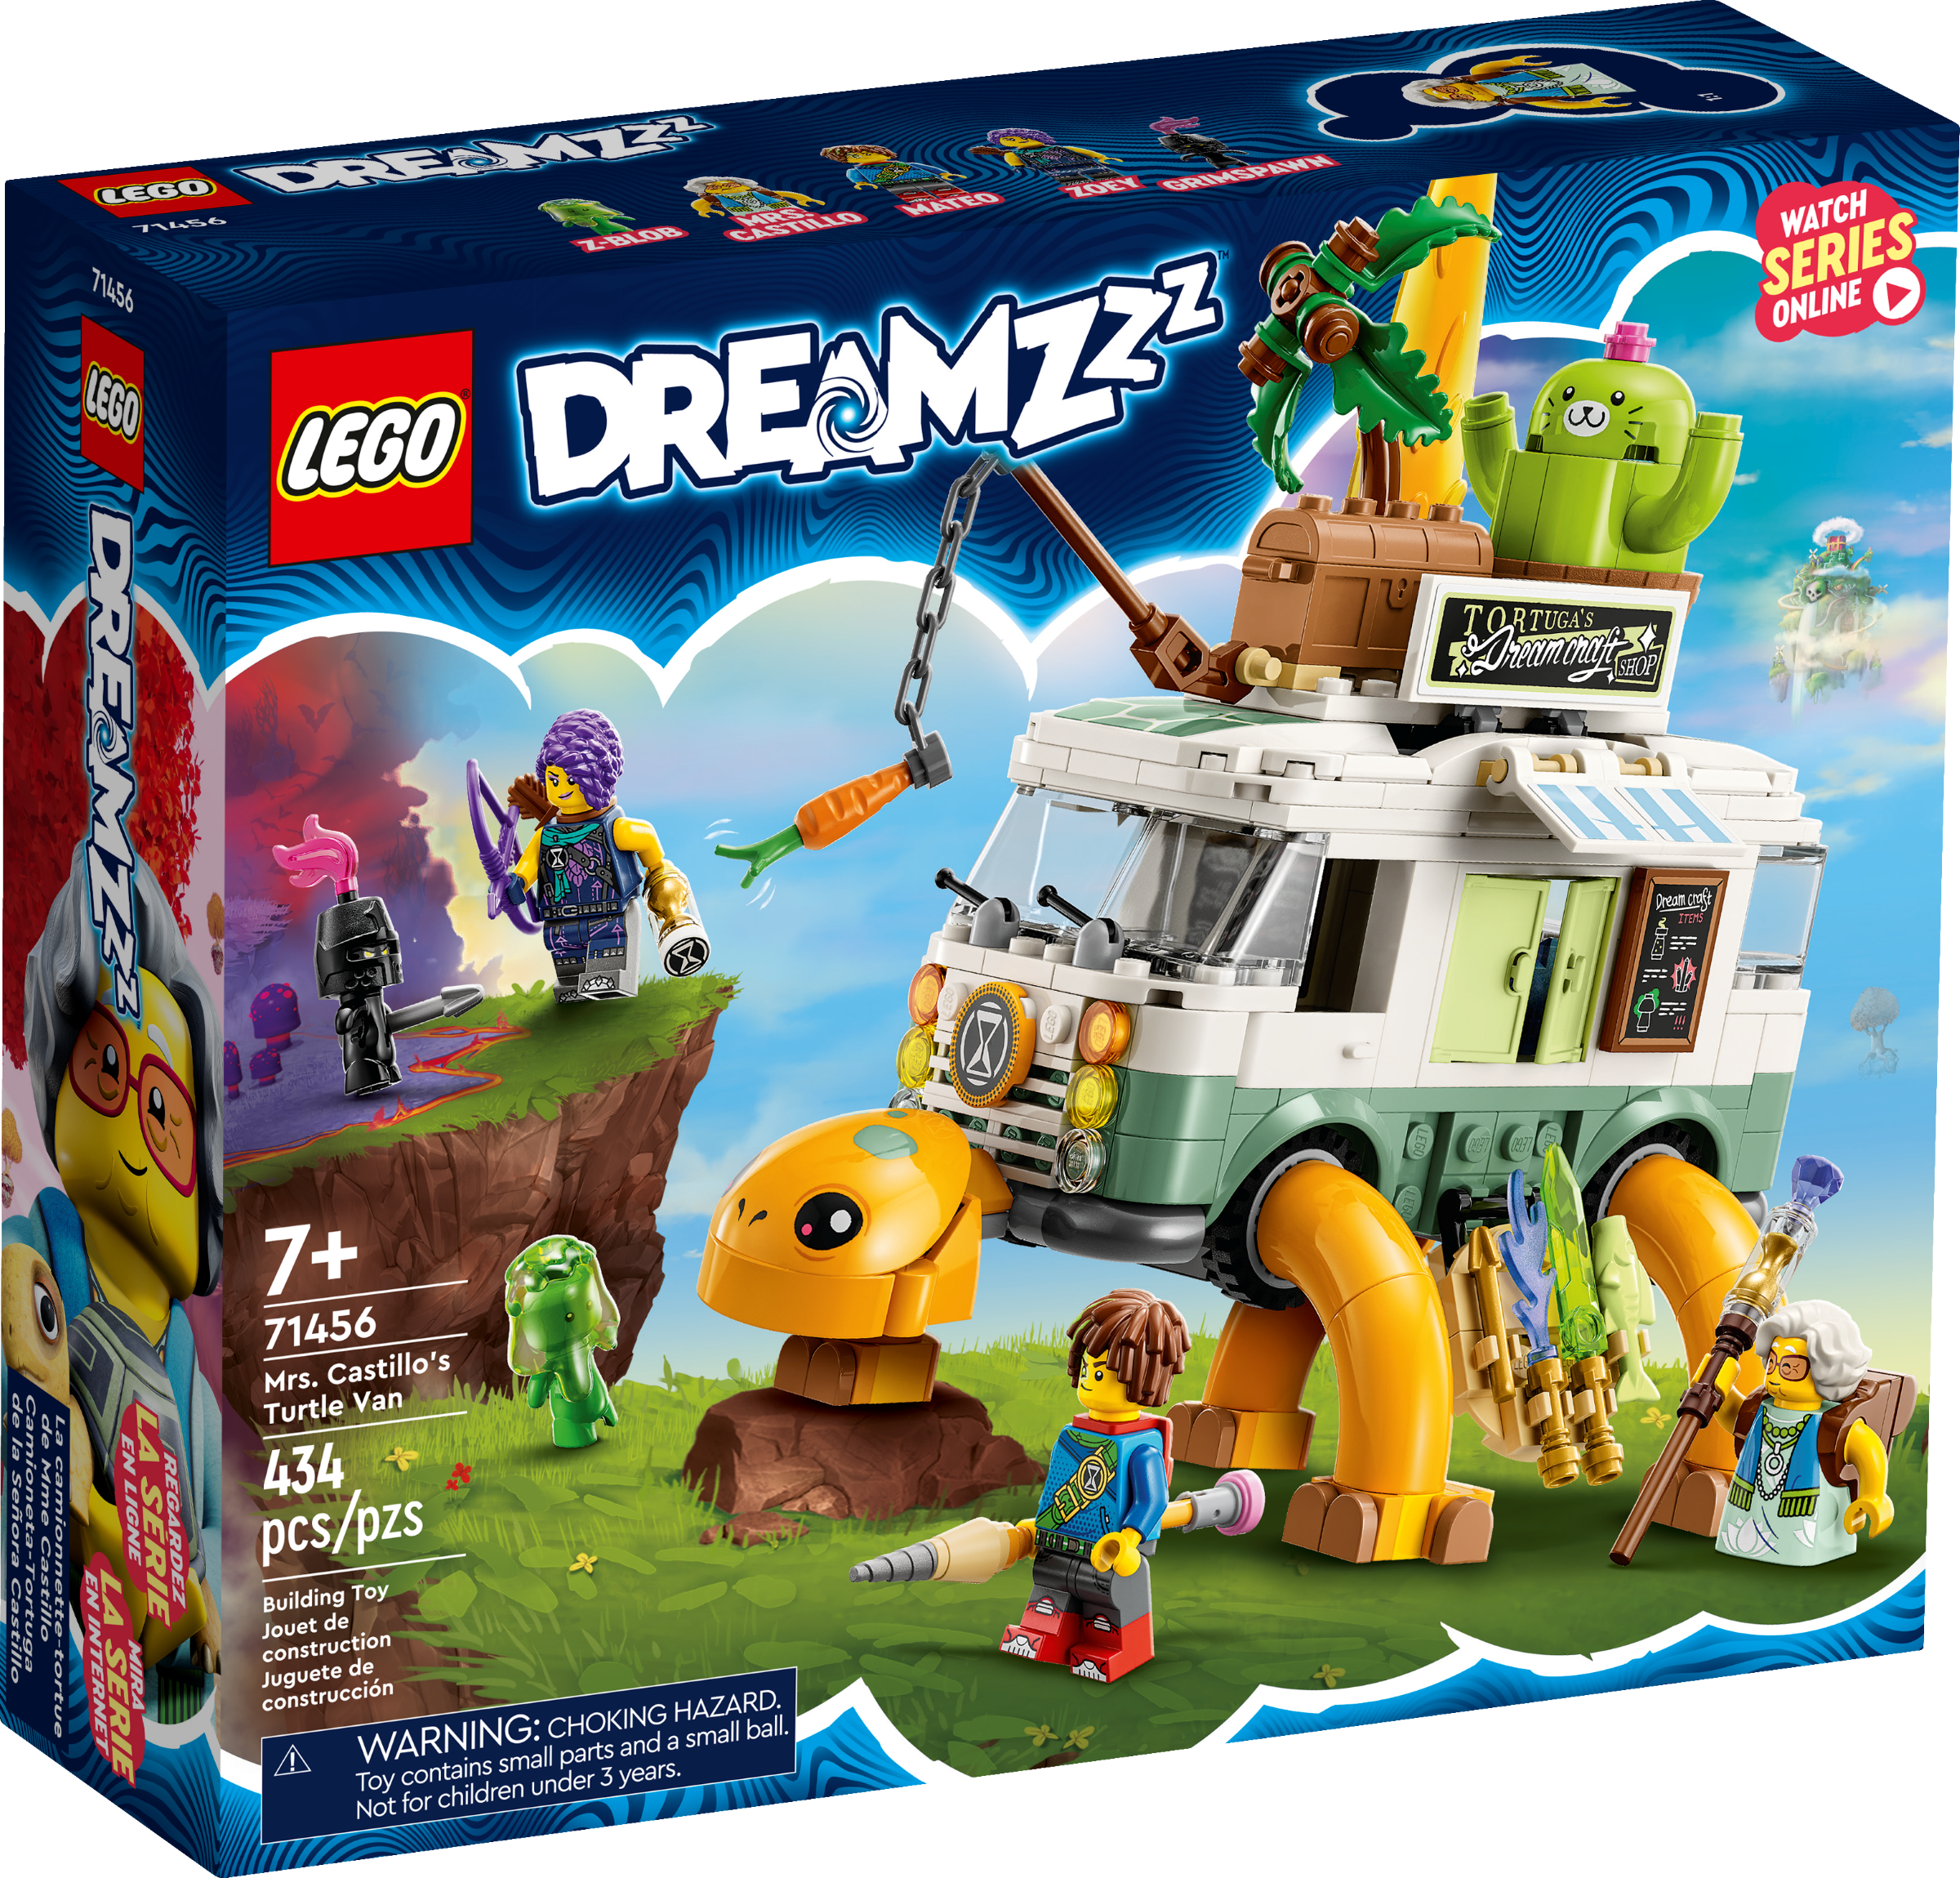 LEGO DREAMZzz Building Sets and Minifigures